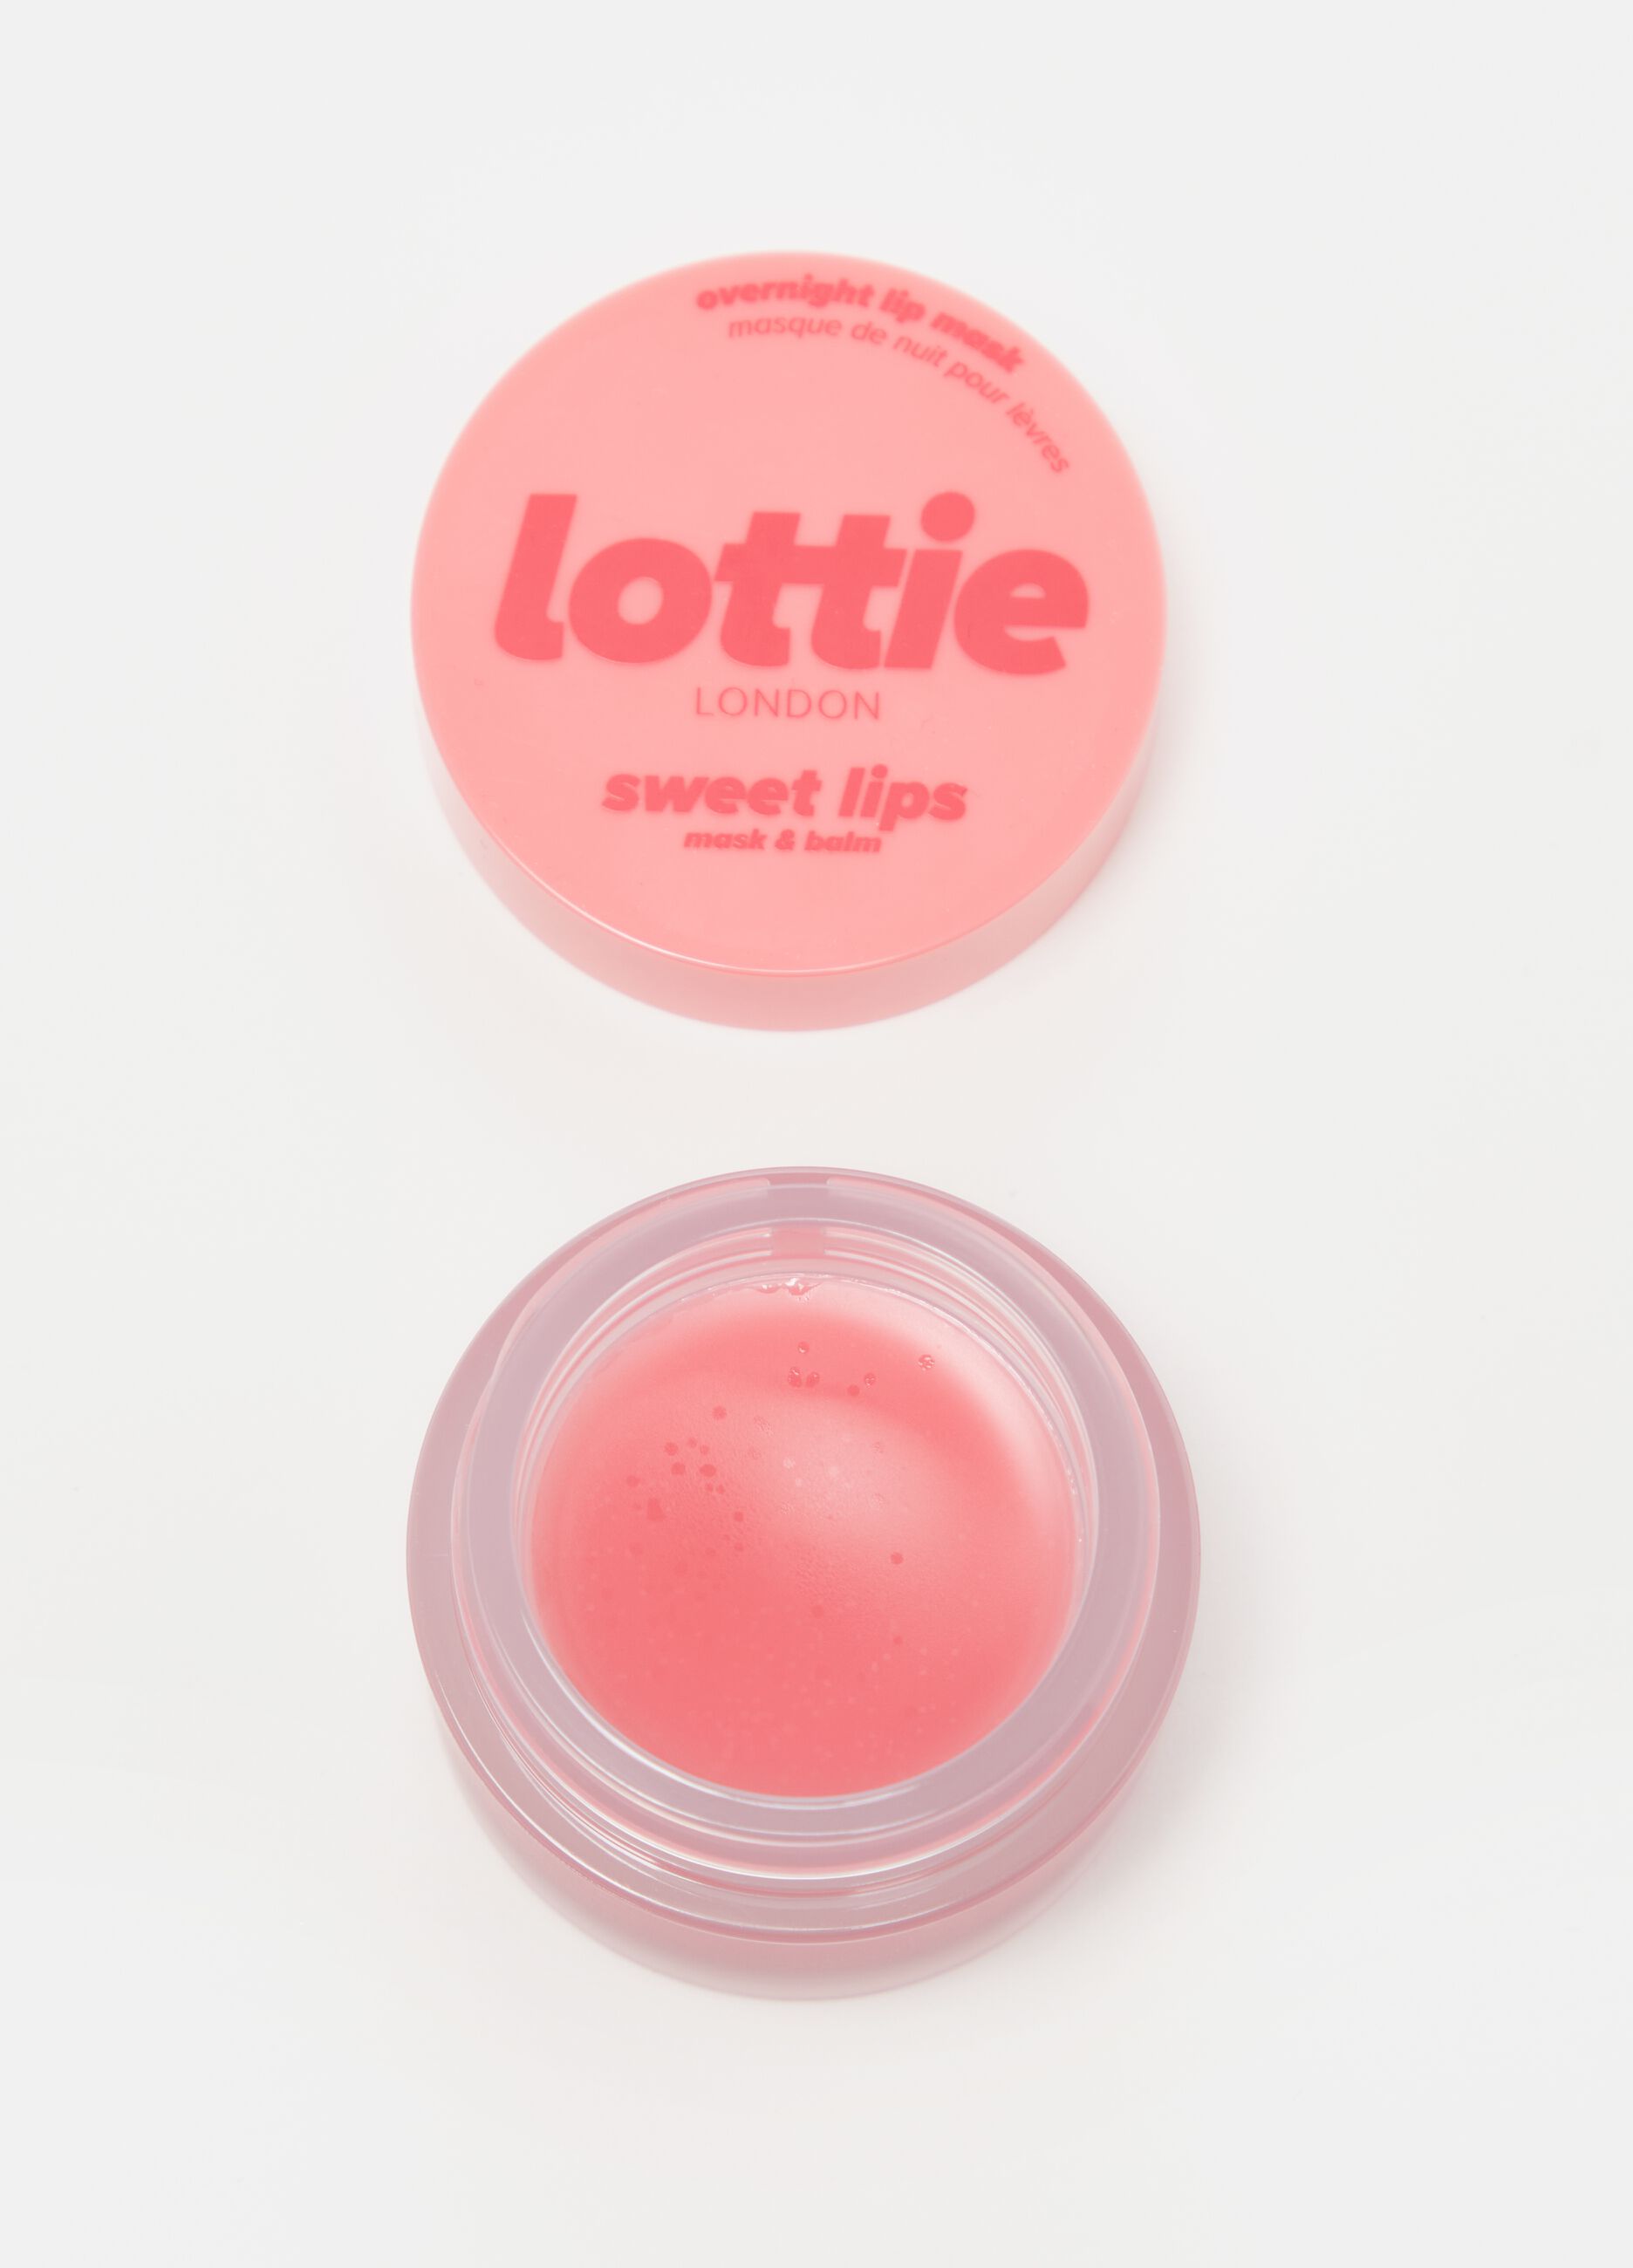 Just juicy lip balm and mask